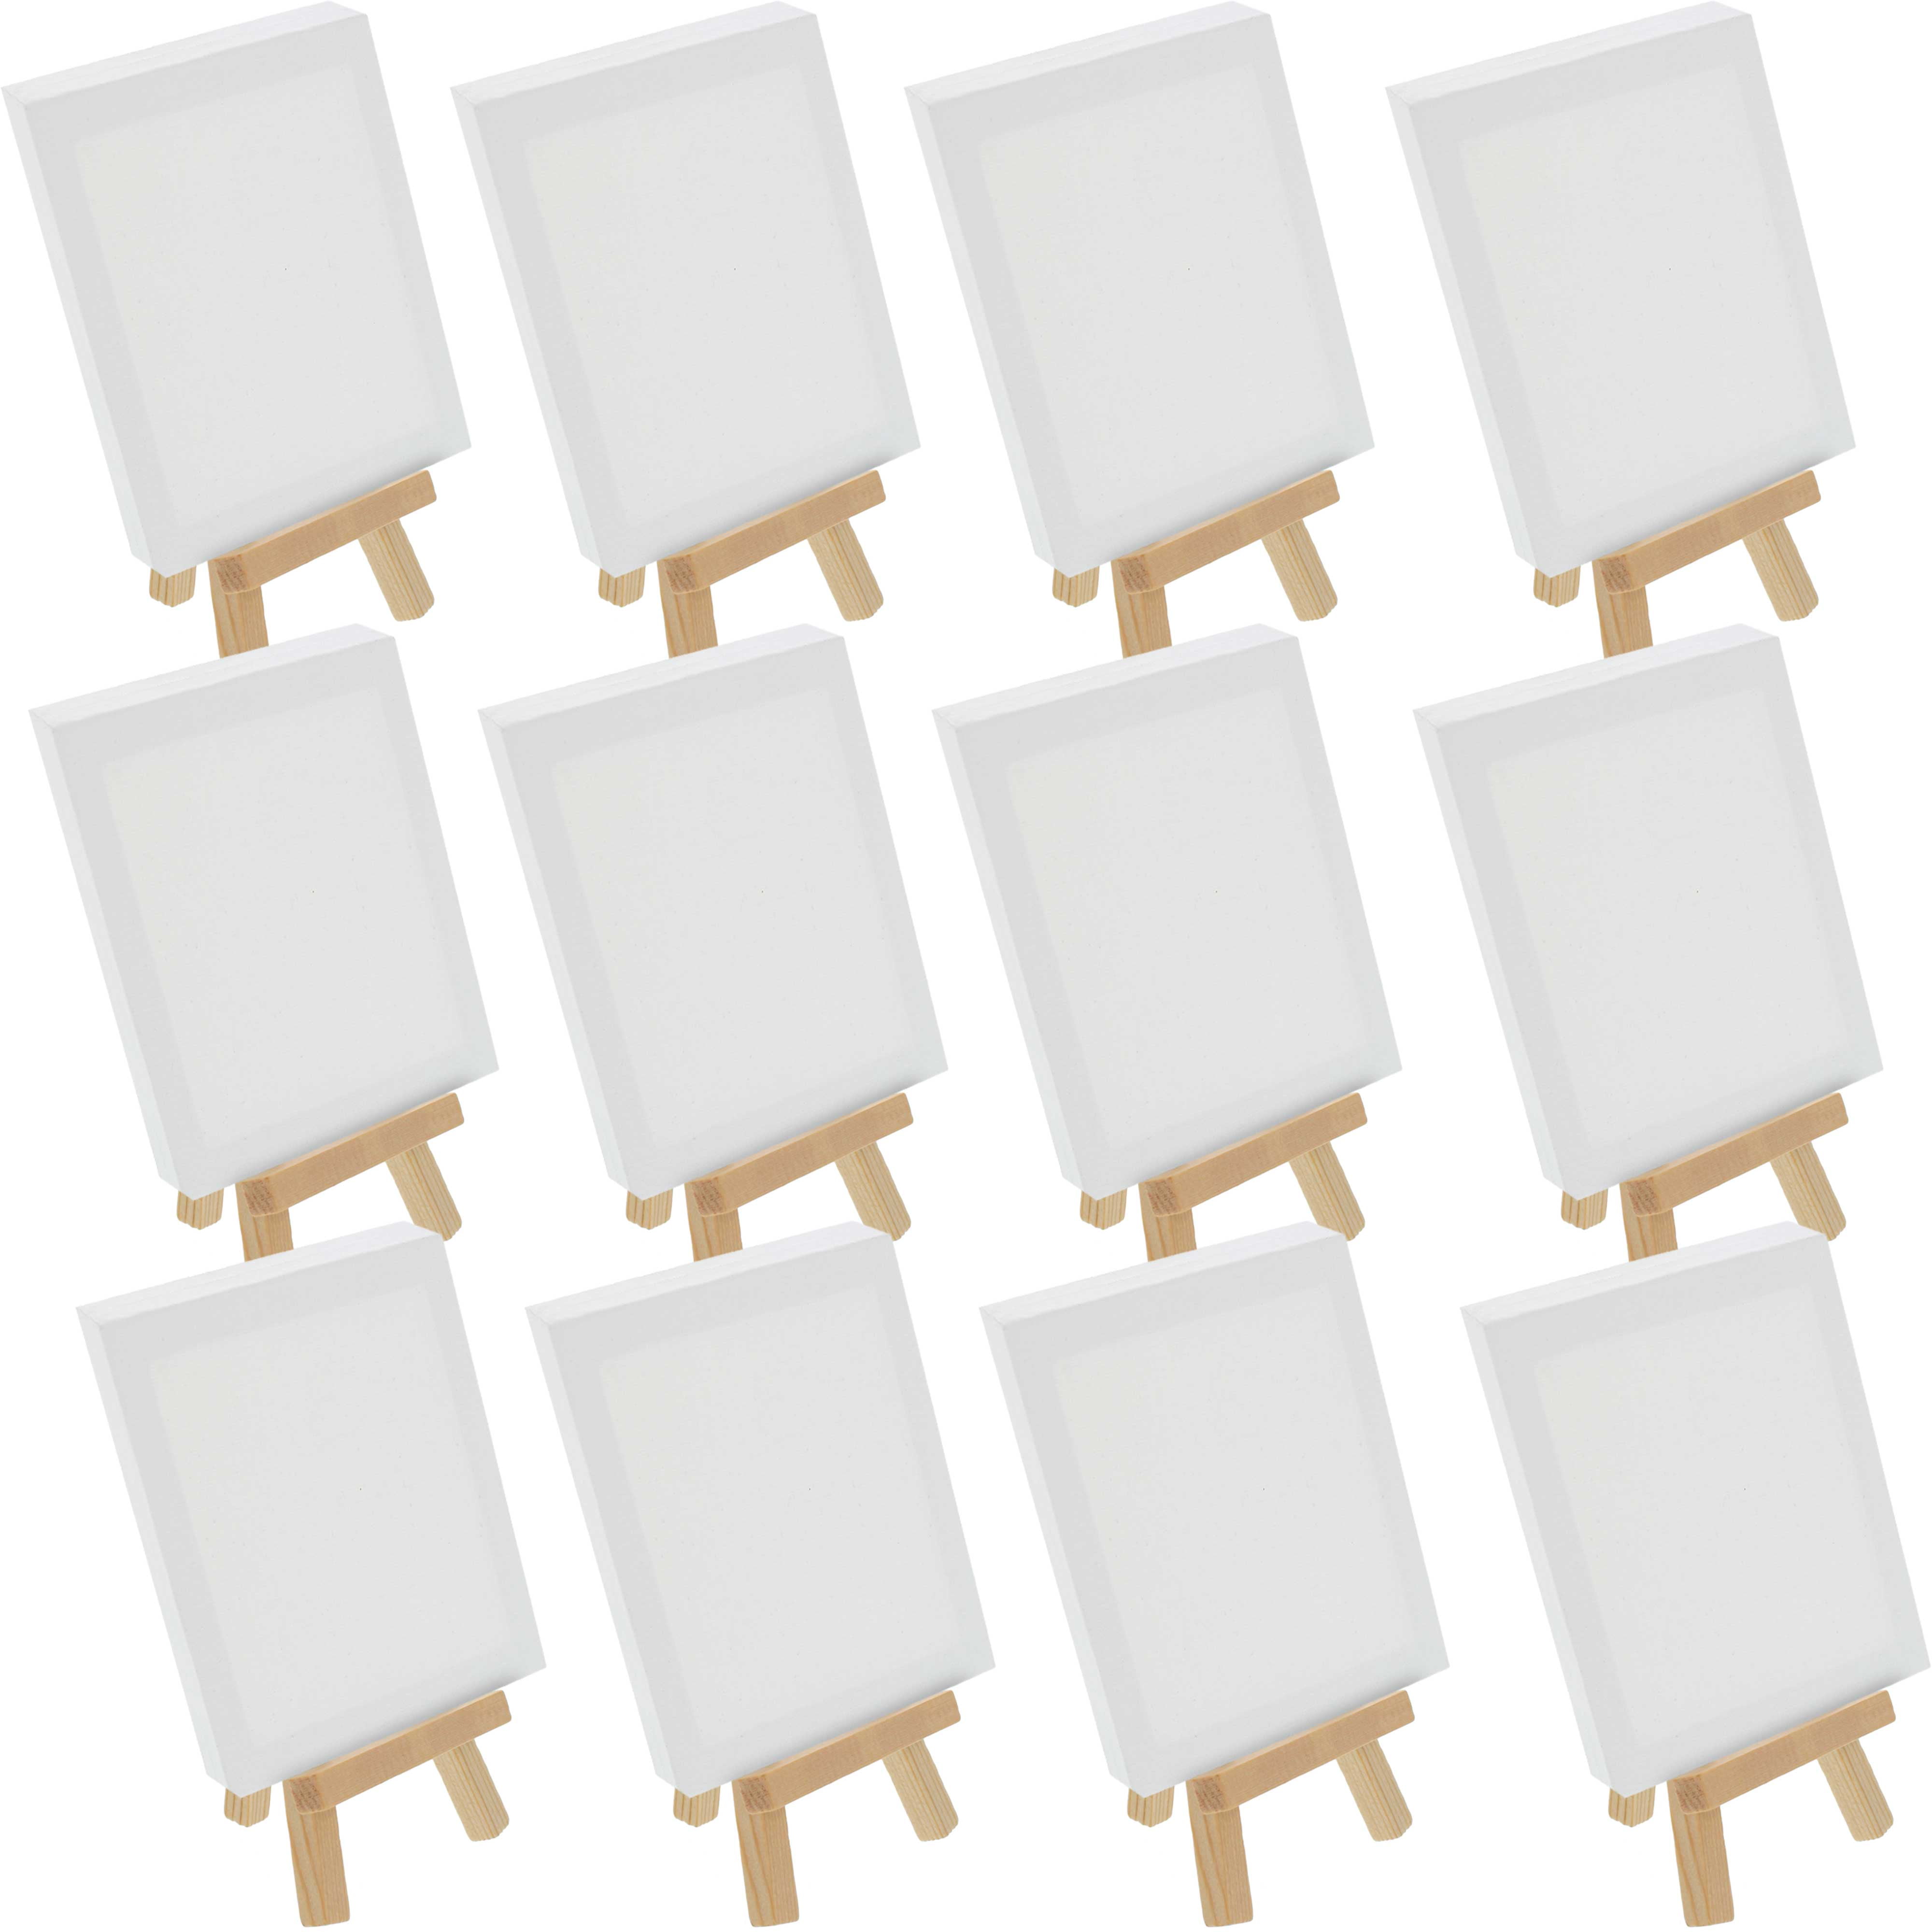 24 Set Mini Canvas Easel Set Include 8 Colors Watercolor Paint Bulk with 4  x 4 Inch Canvases and Easels Washable Watercolor Kids Paint for School